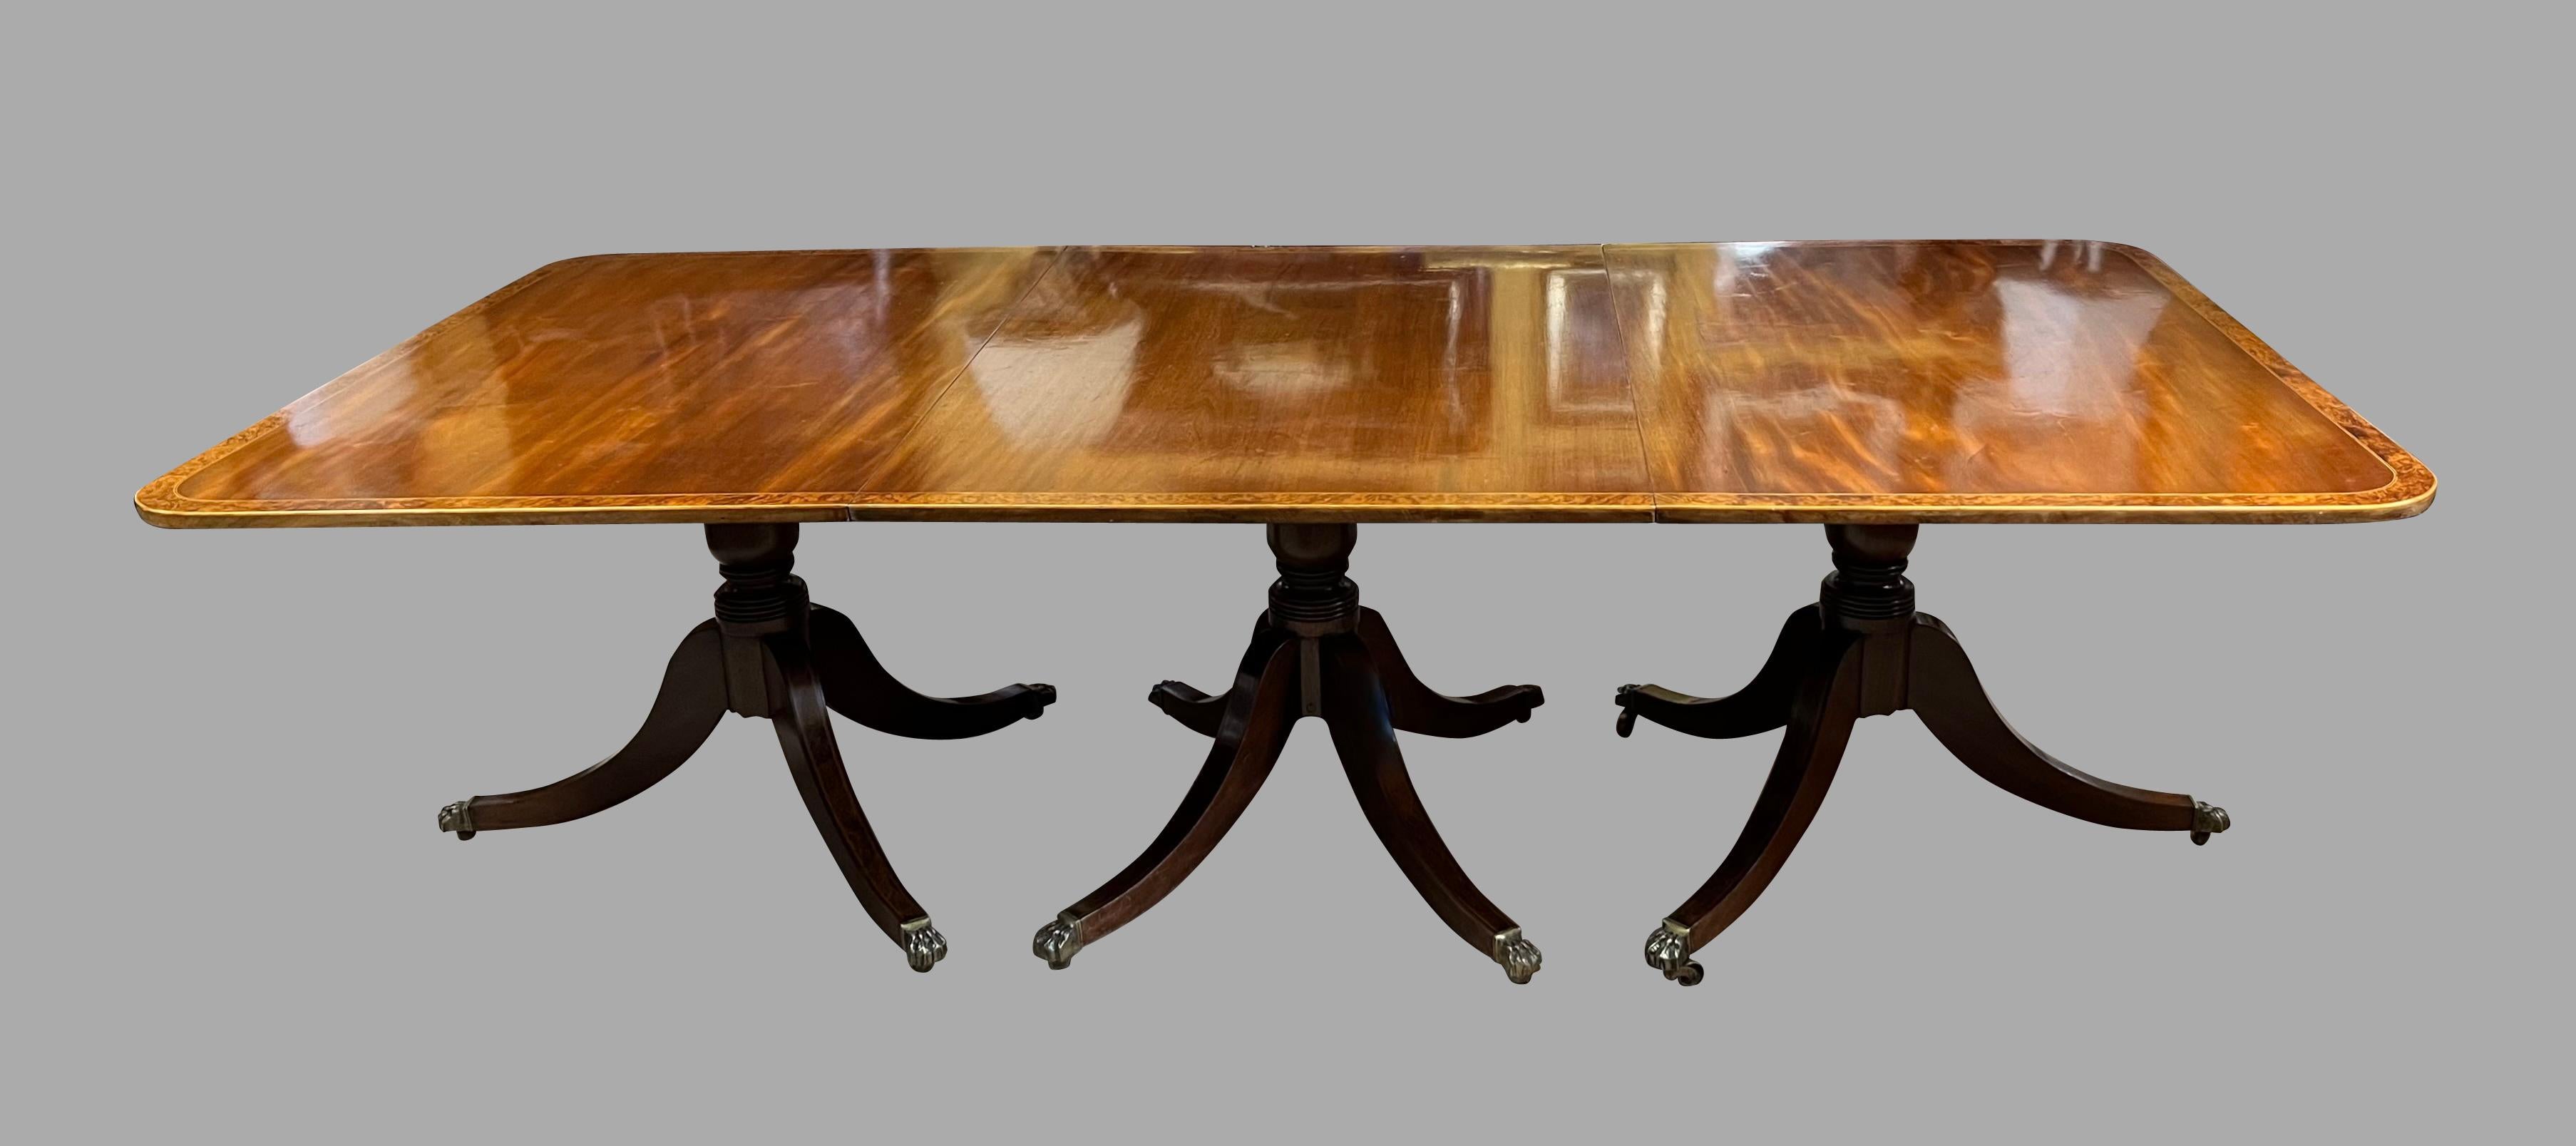 Georgian Style Burl Elm Crossbanded Mahogany 3 Pedestal Dining Table with Leaves In Good Condition For Sale In San Francisco, CA